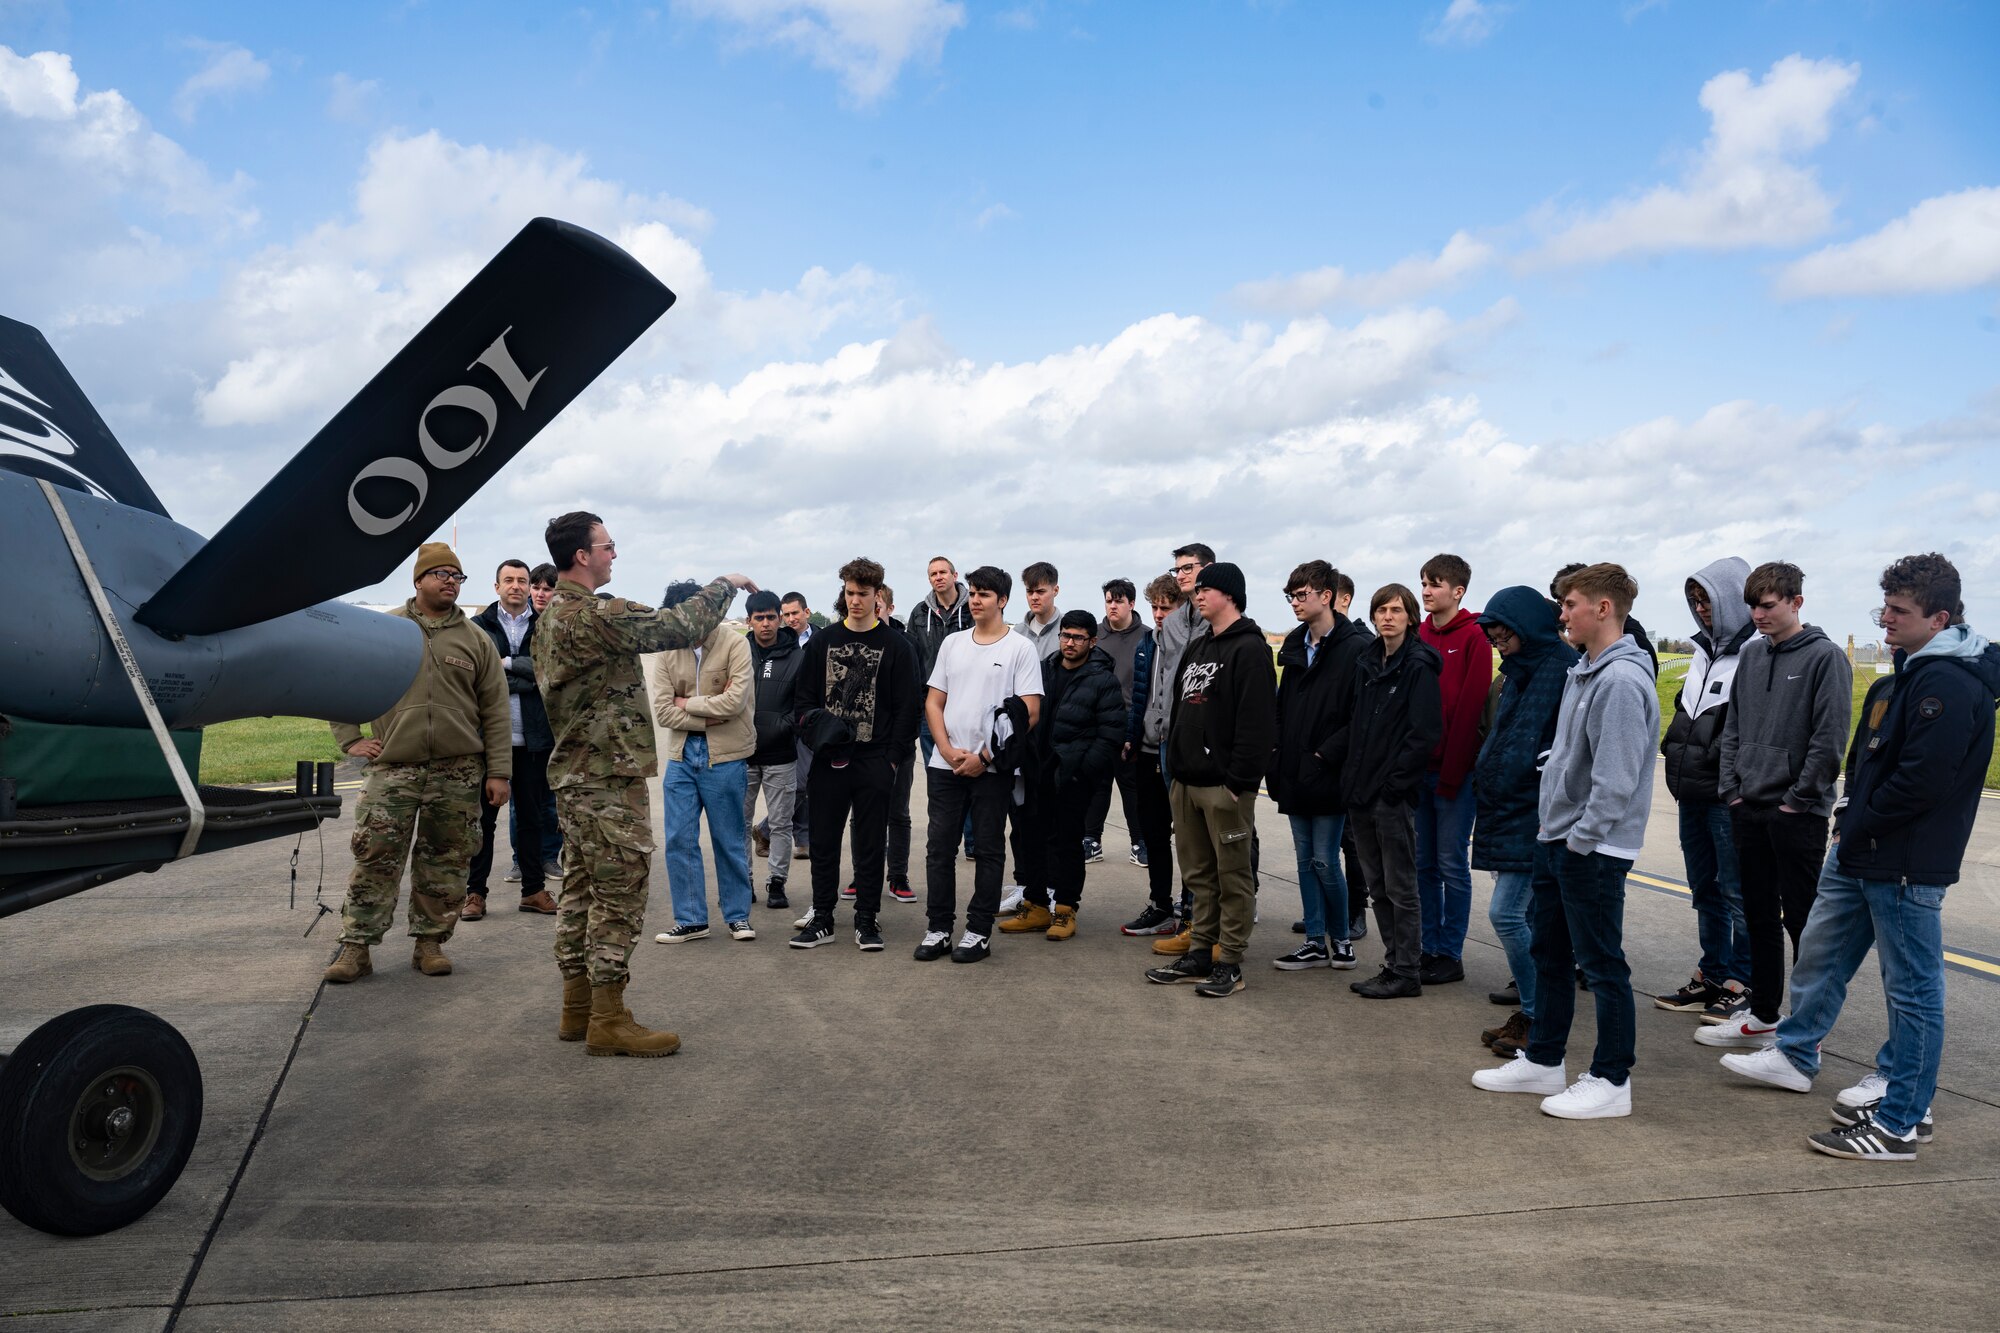 West Suffolk College students learned about the capabilities of the KC-135 Stratotanker aircraft assigned to the 100th Air Refueling Wing during the tour.